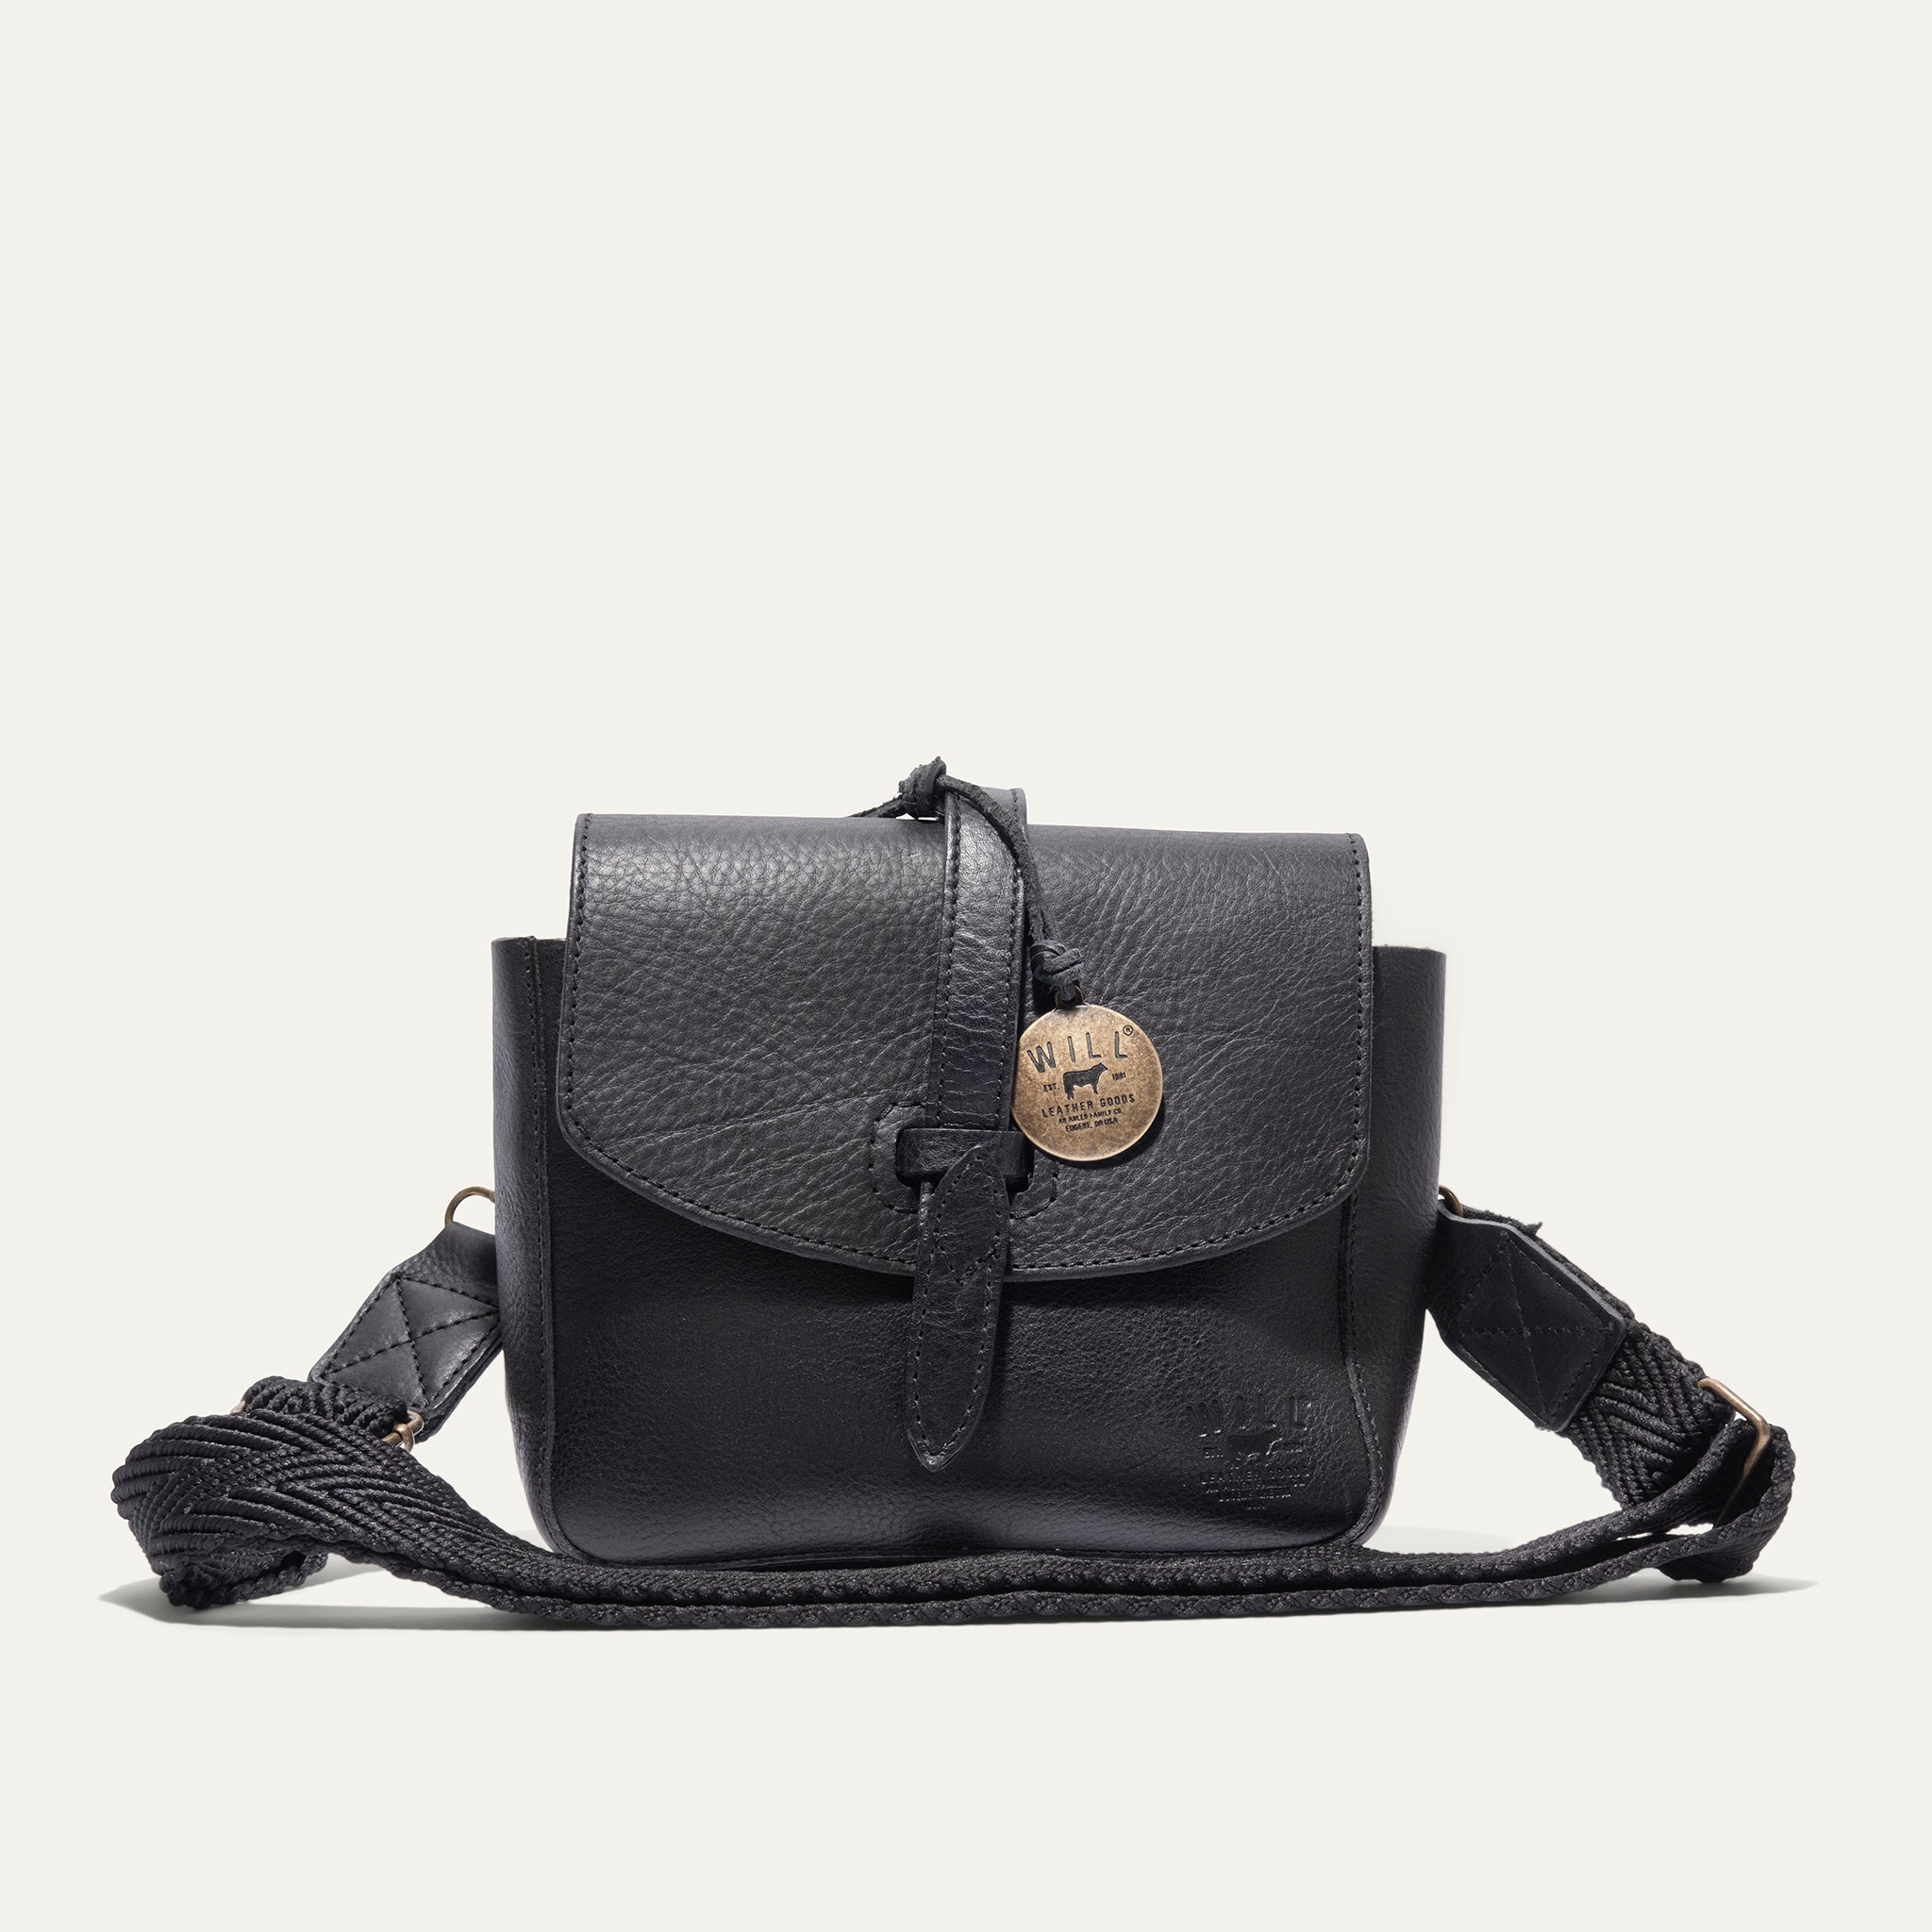 Tobacco and Black Bison Leather On The Road Convertible Hip, Crossbody,  Belt Bag - Handcrafted Convertible Leather Backpacks and Purses for Daily  or